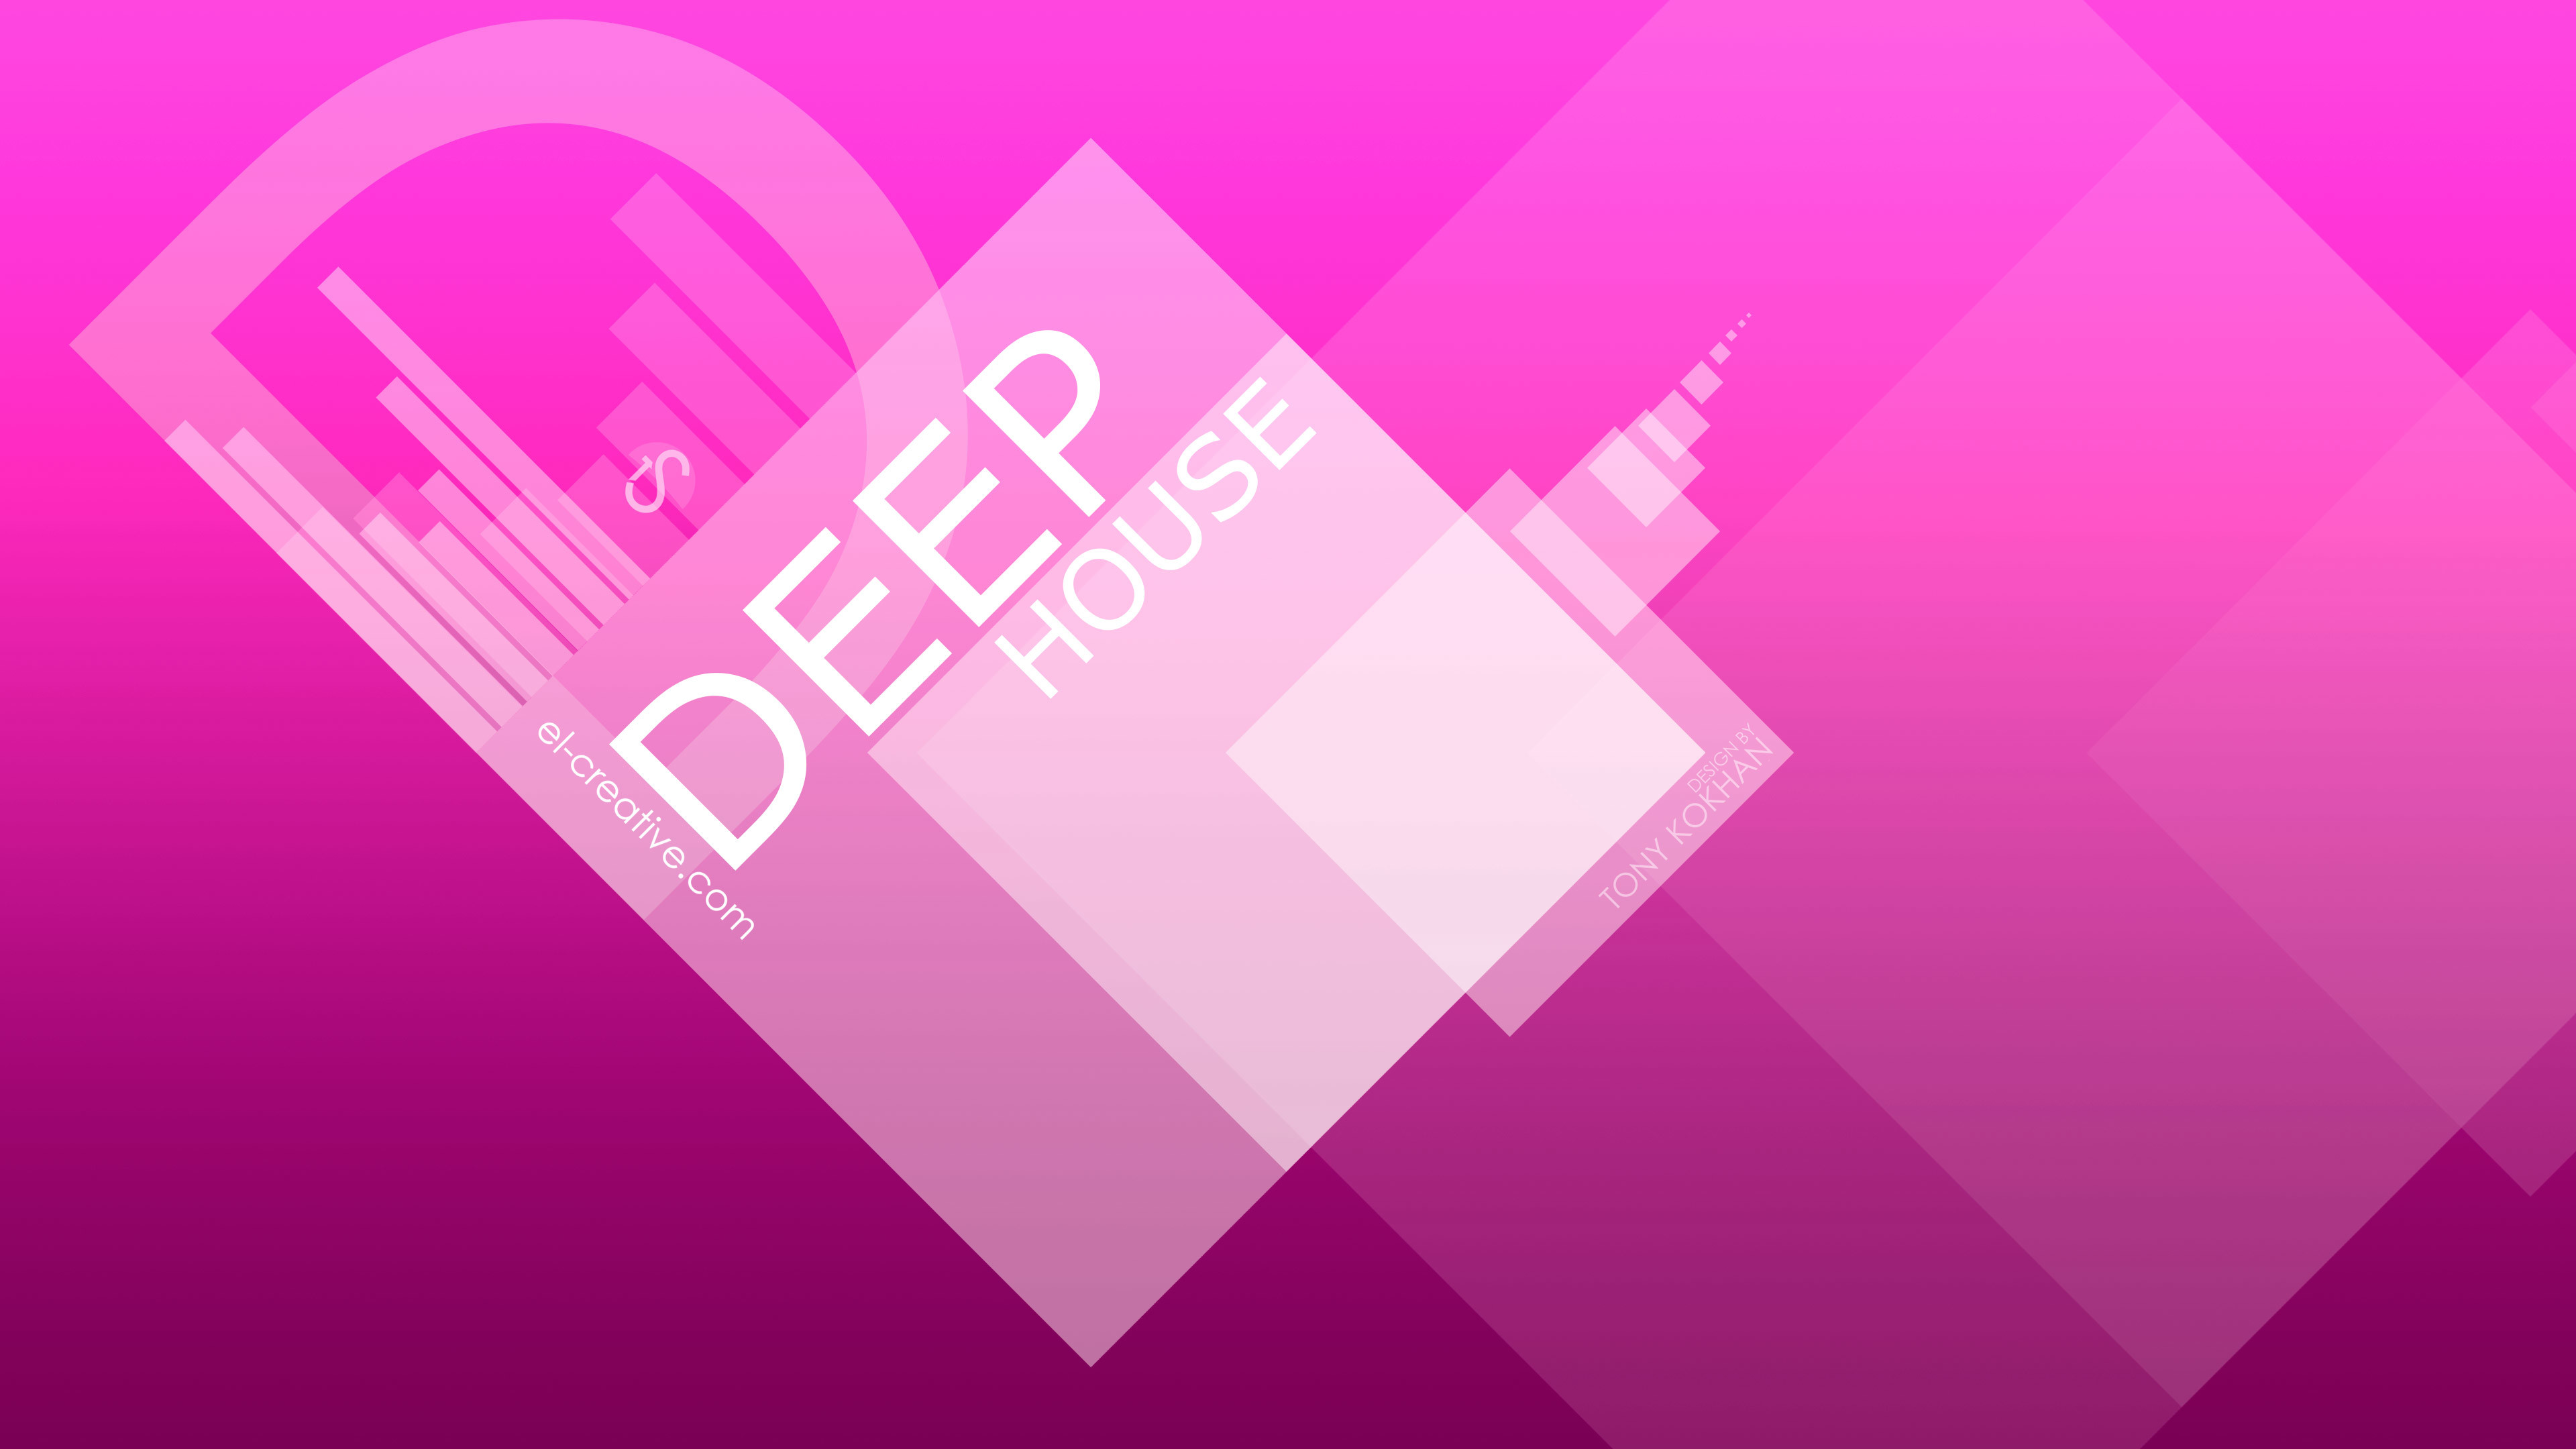 3840x2160 ... Deep-House-Music-Abstract-DJ-Words-Pink-Colors- ...